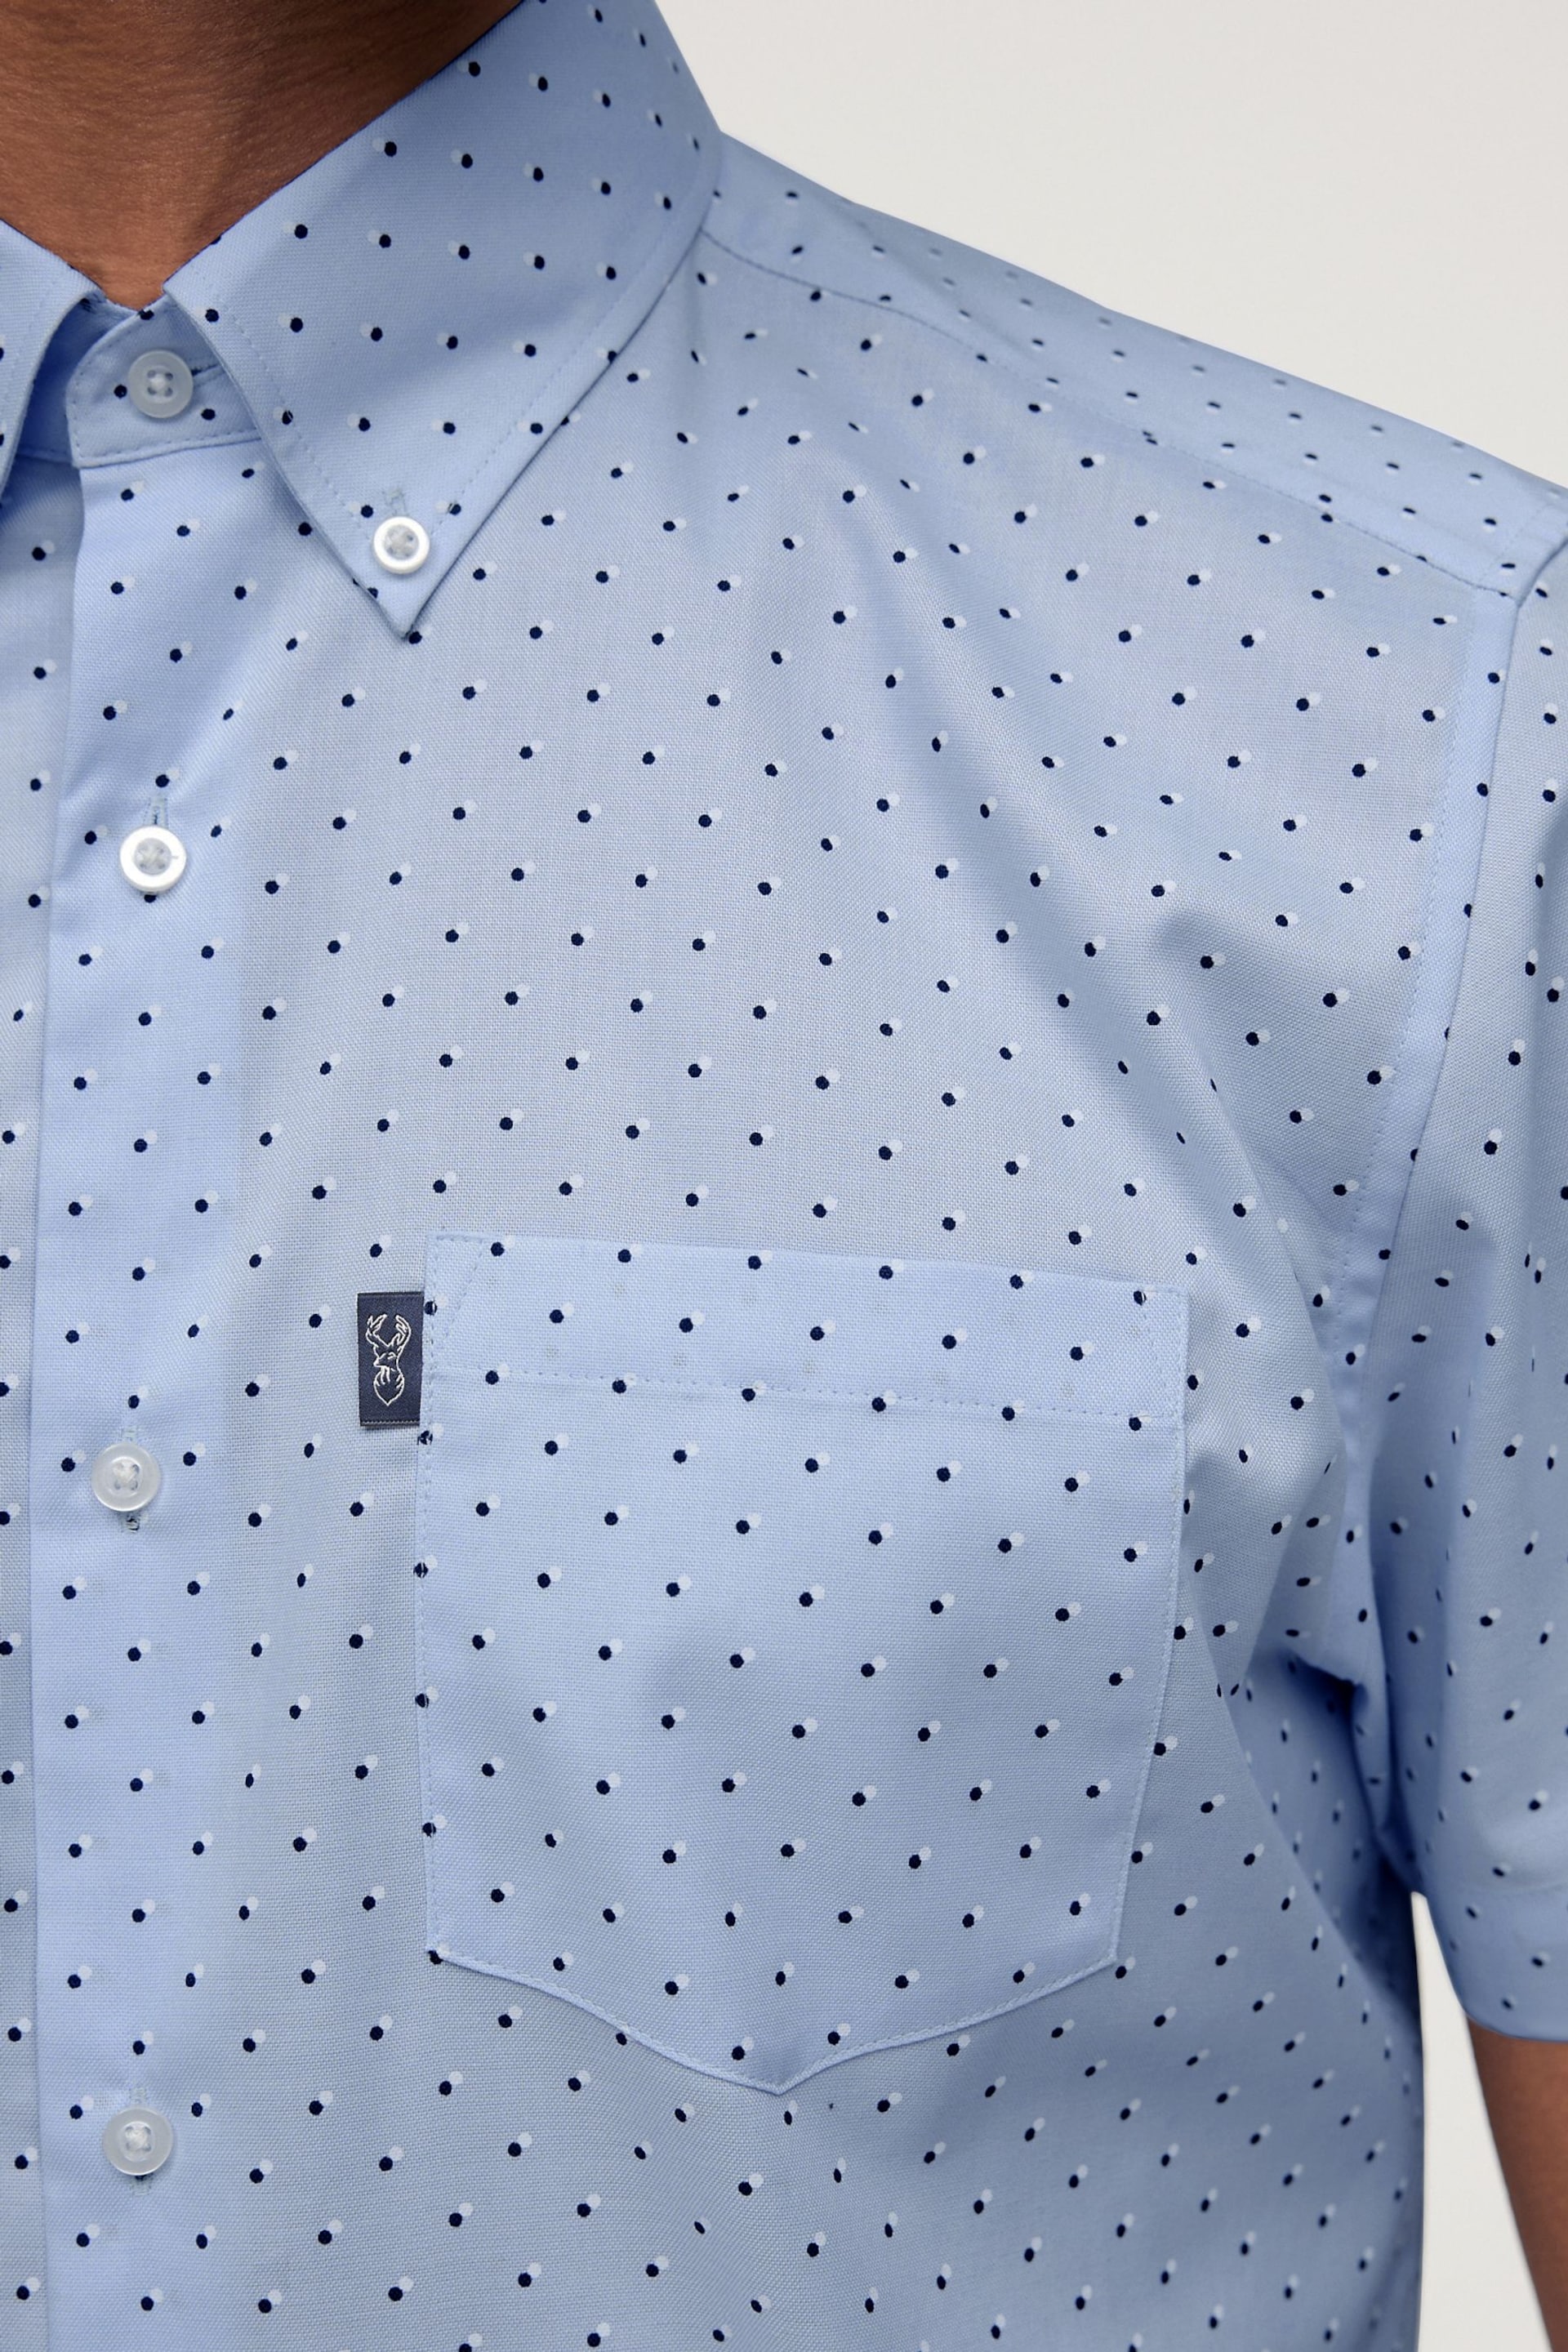 Light Blue Easy Iron Button Down Short Sleeve Oxford Shirt - Image 5 of 8